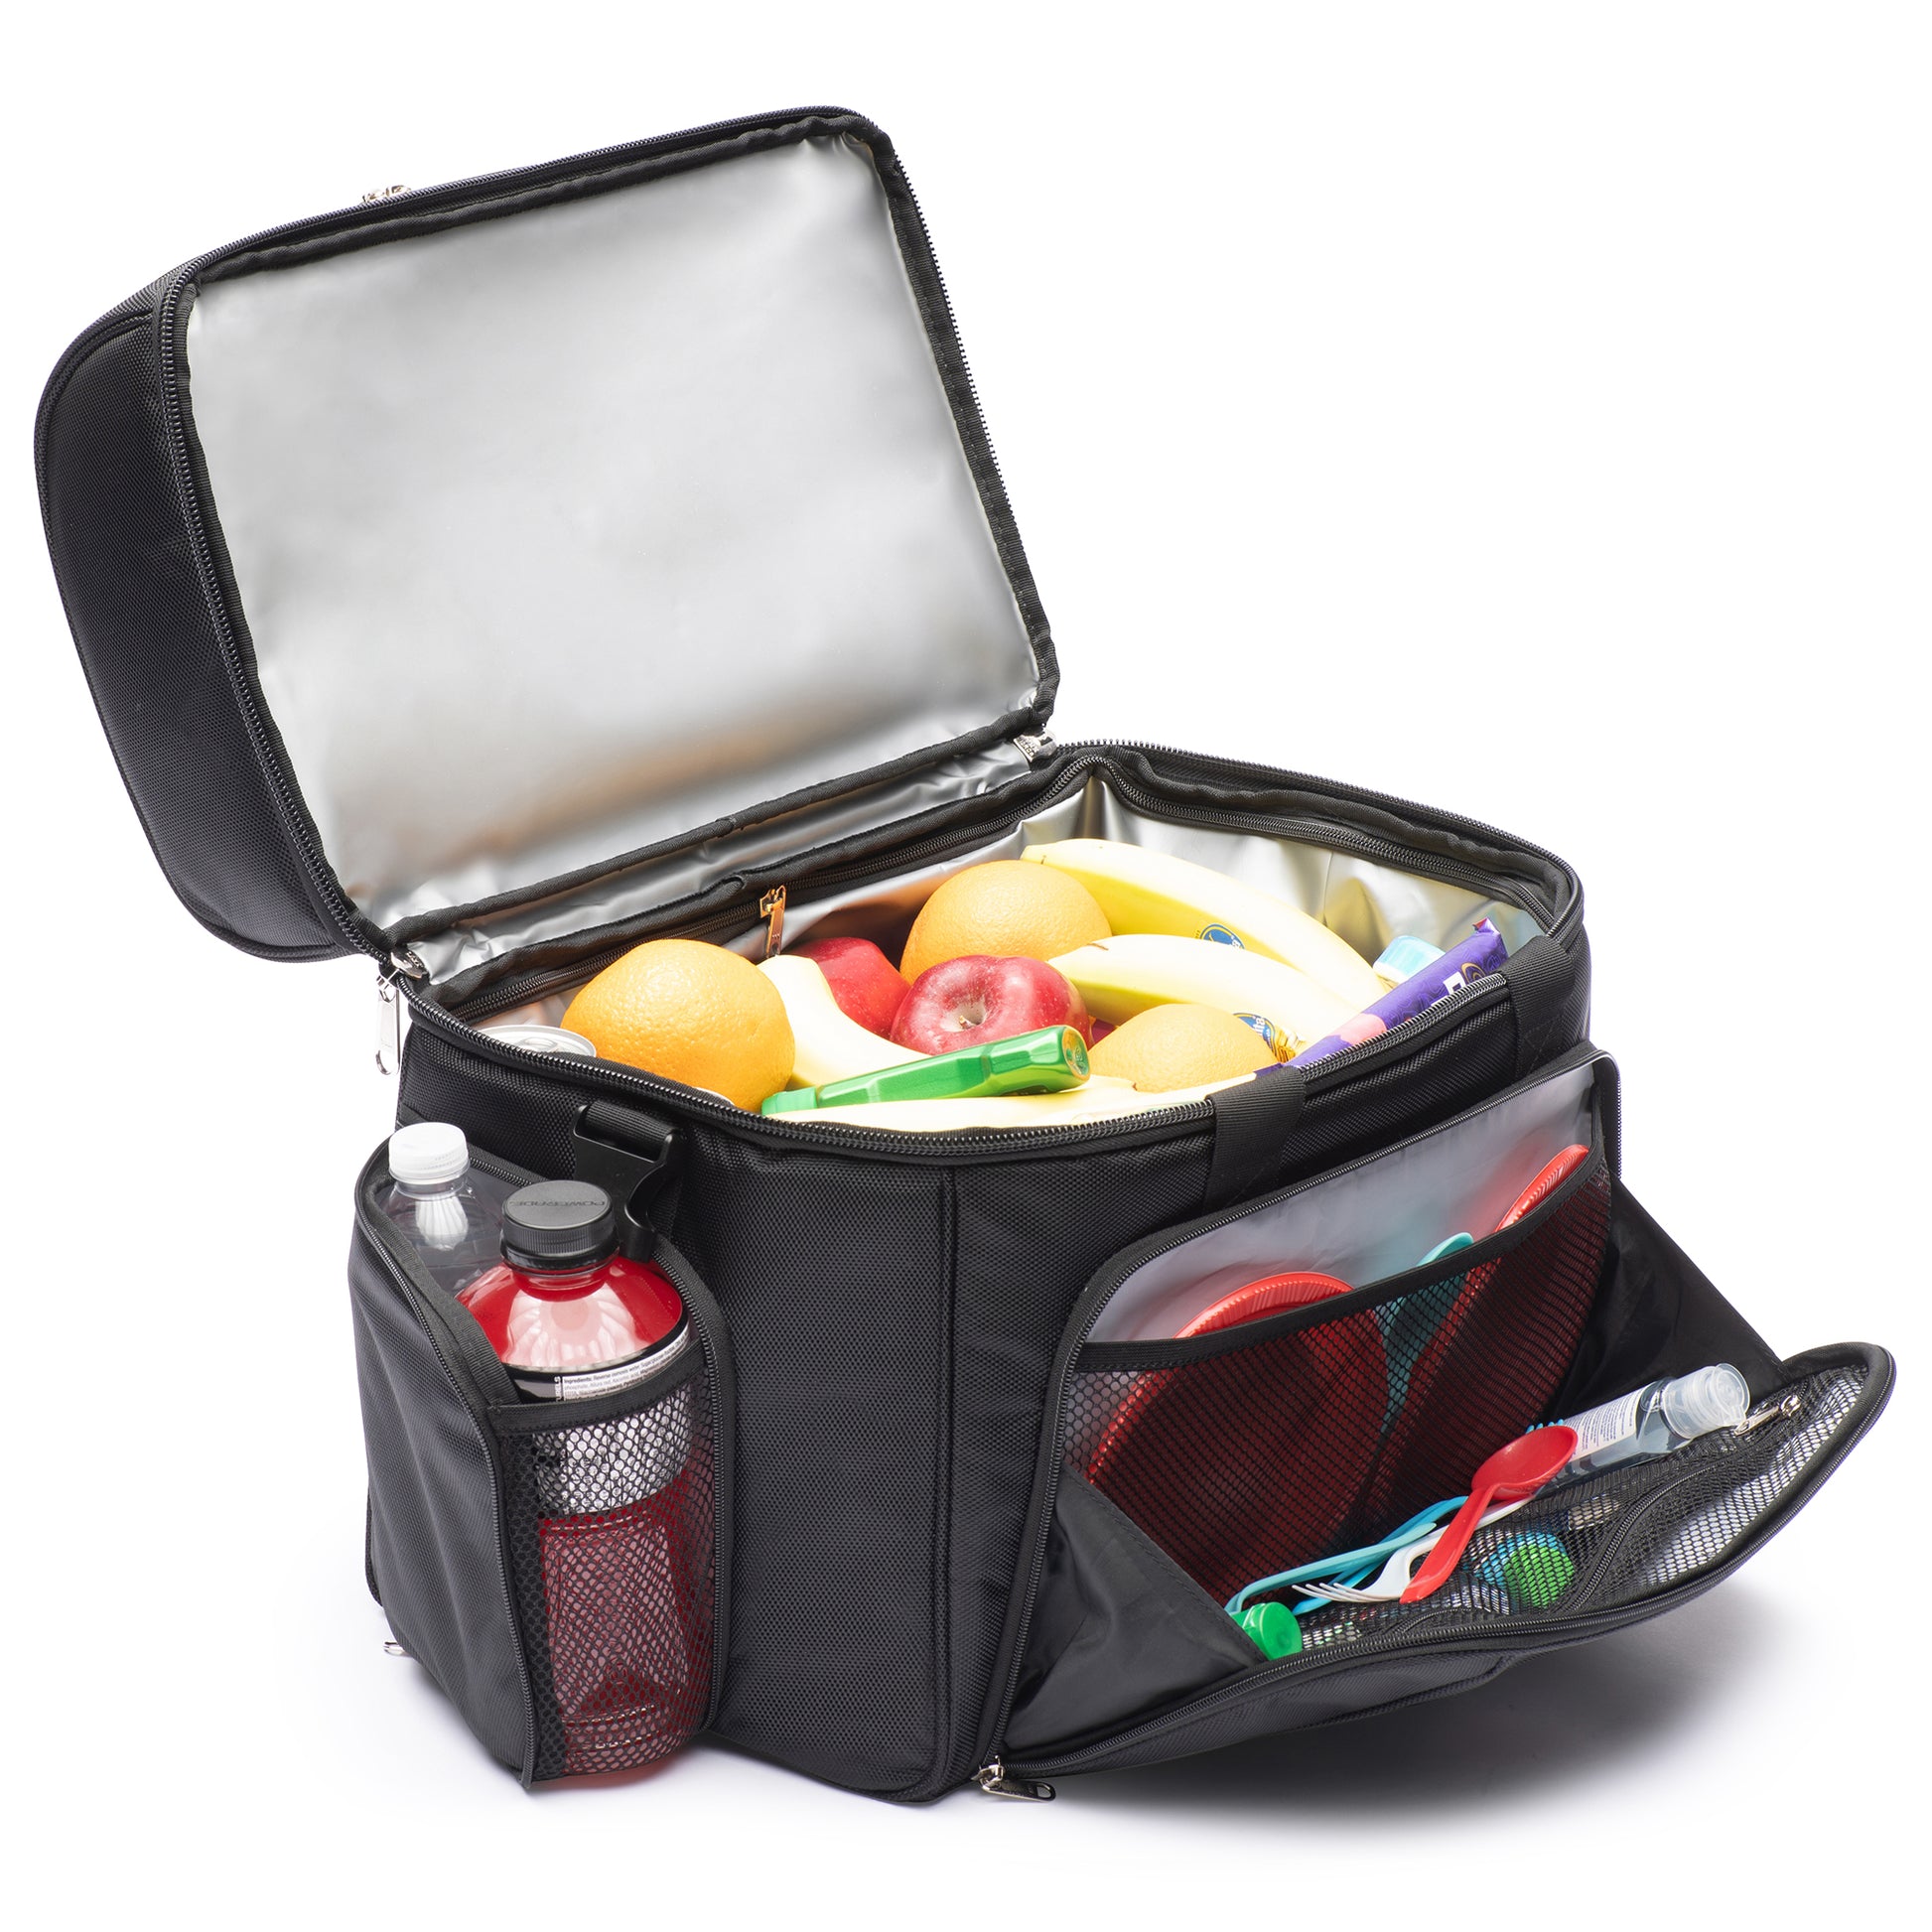  XXX-Large Insulated Cooler Bag with Hard-Bottom. Made from  Heavy Duty Materials, Thick Insulation, Large Sturdy Zipper. for Shopping,  Grocery, Pizza Delivery, Family Events. : Industrial & Scientific